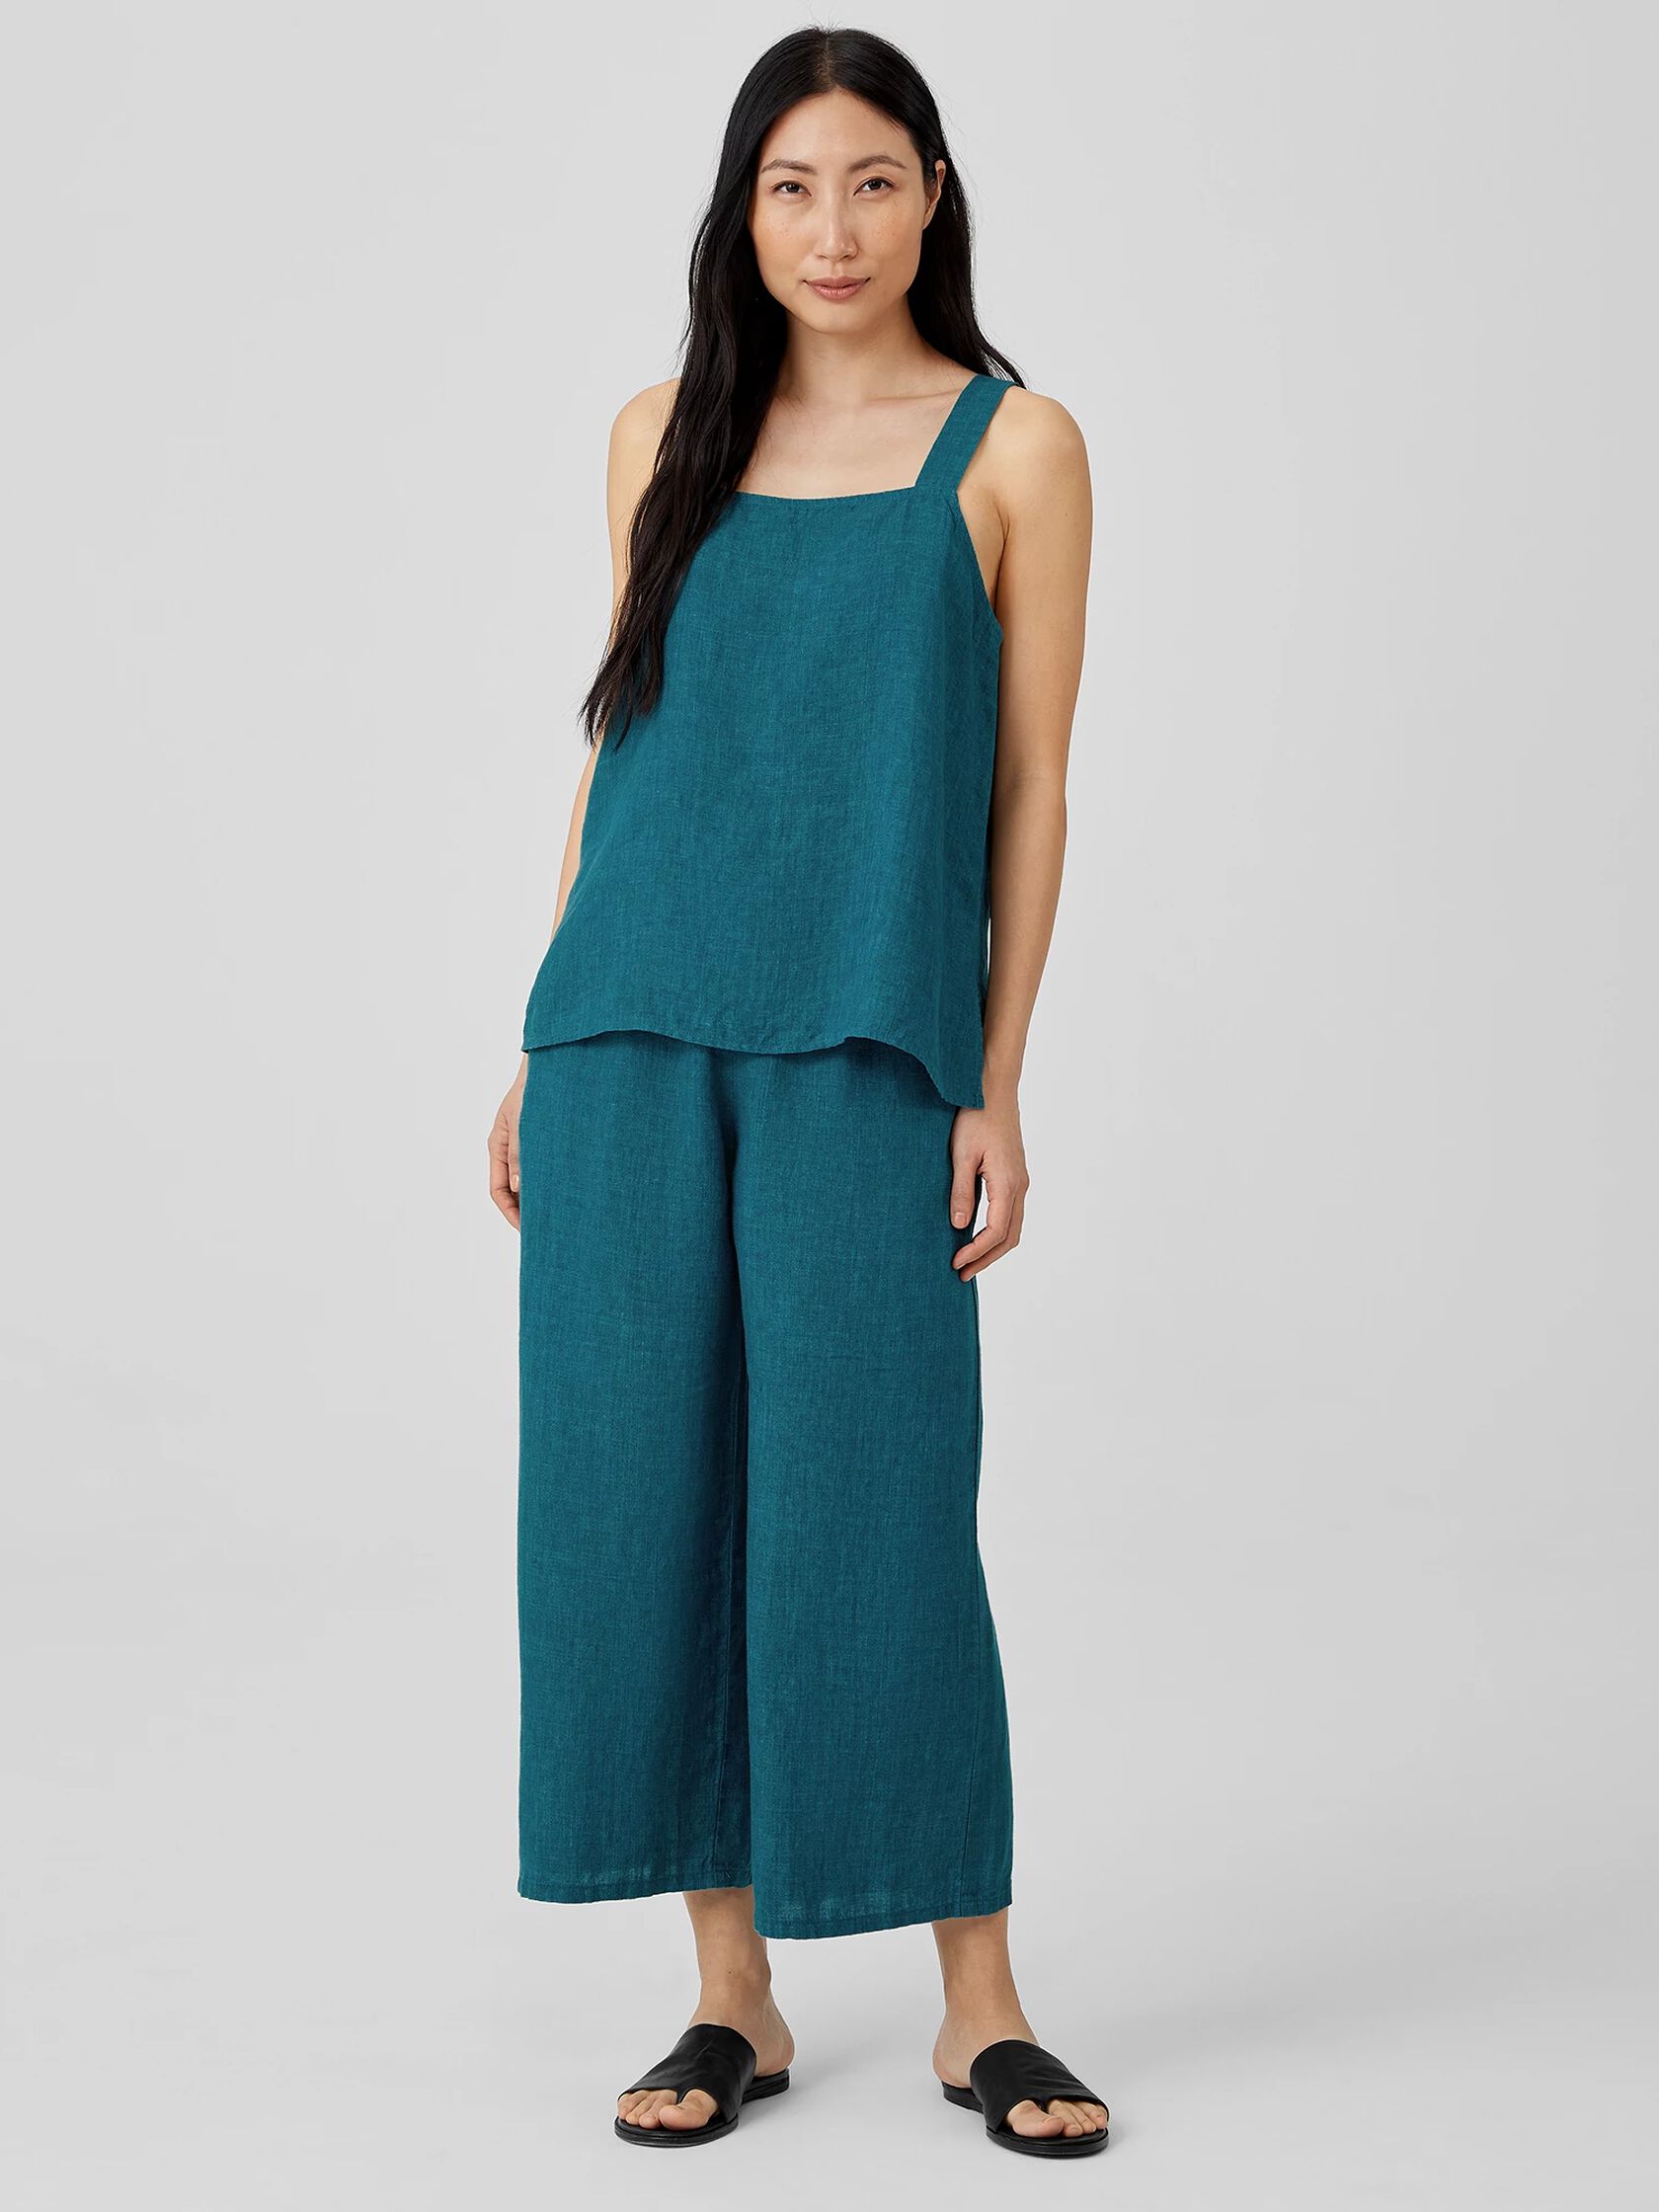 Washed Organic Linen Delave Tank | EILEEN FISHER